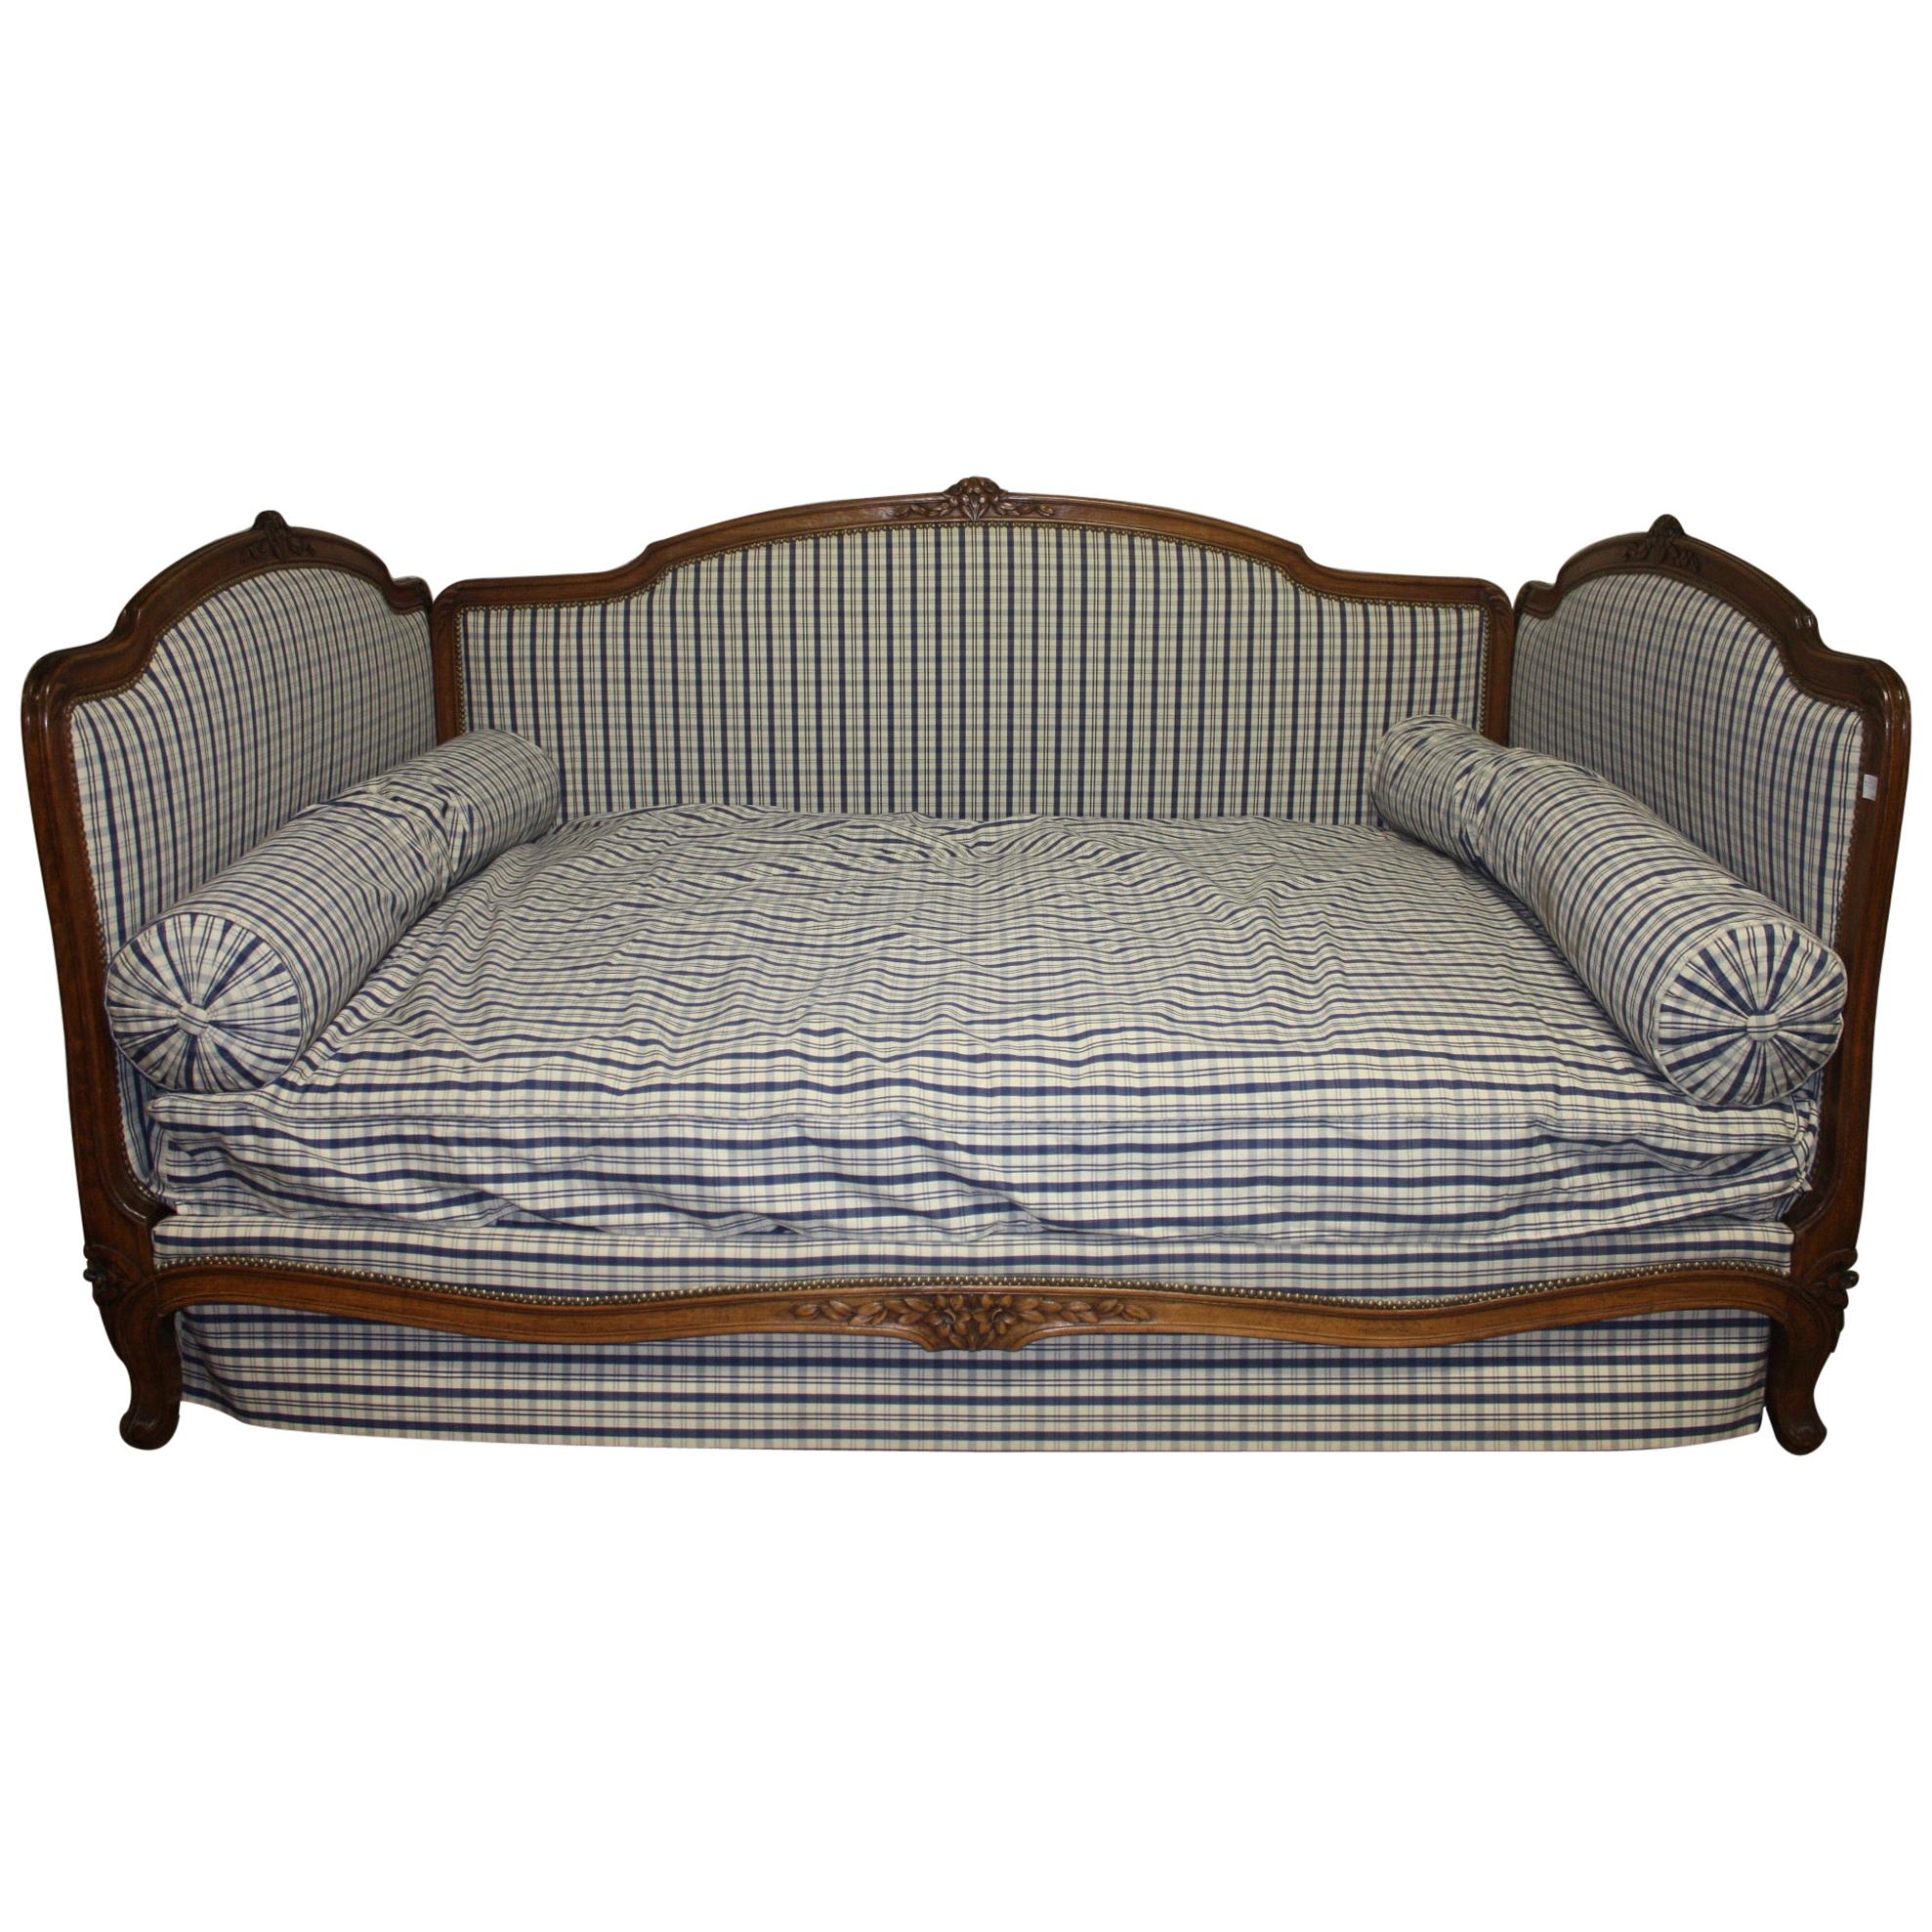 Exquisite 19th Century French Daybed